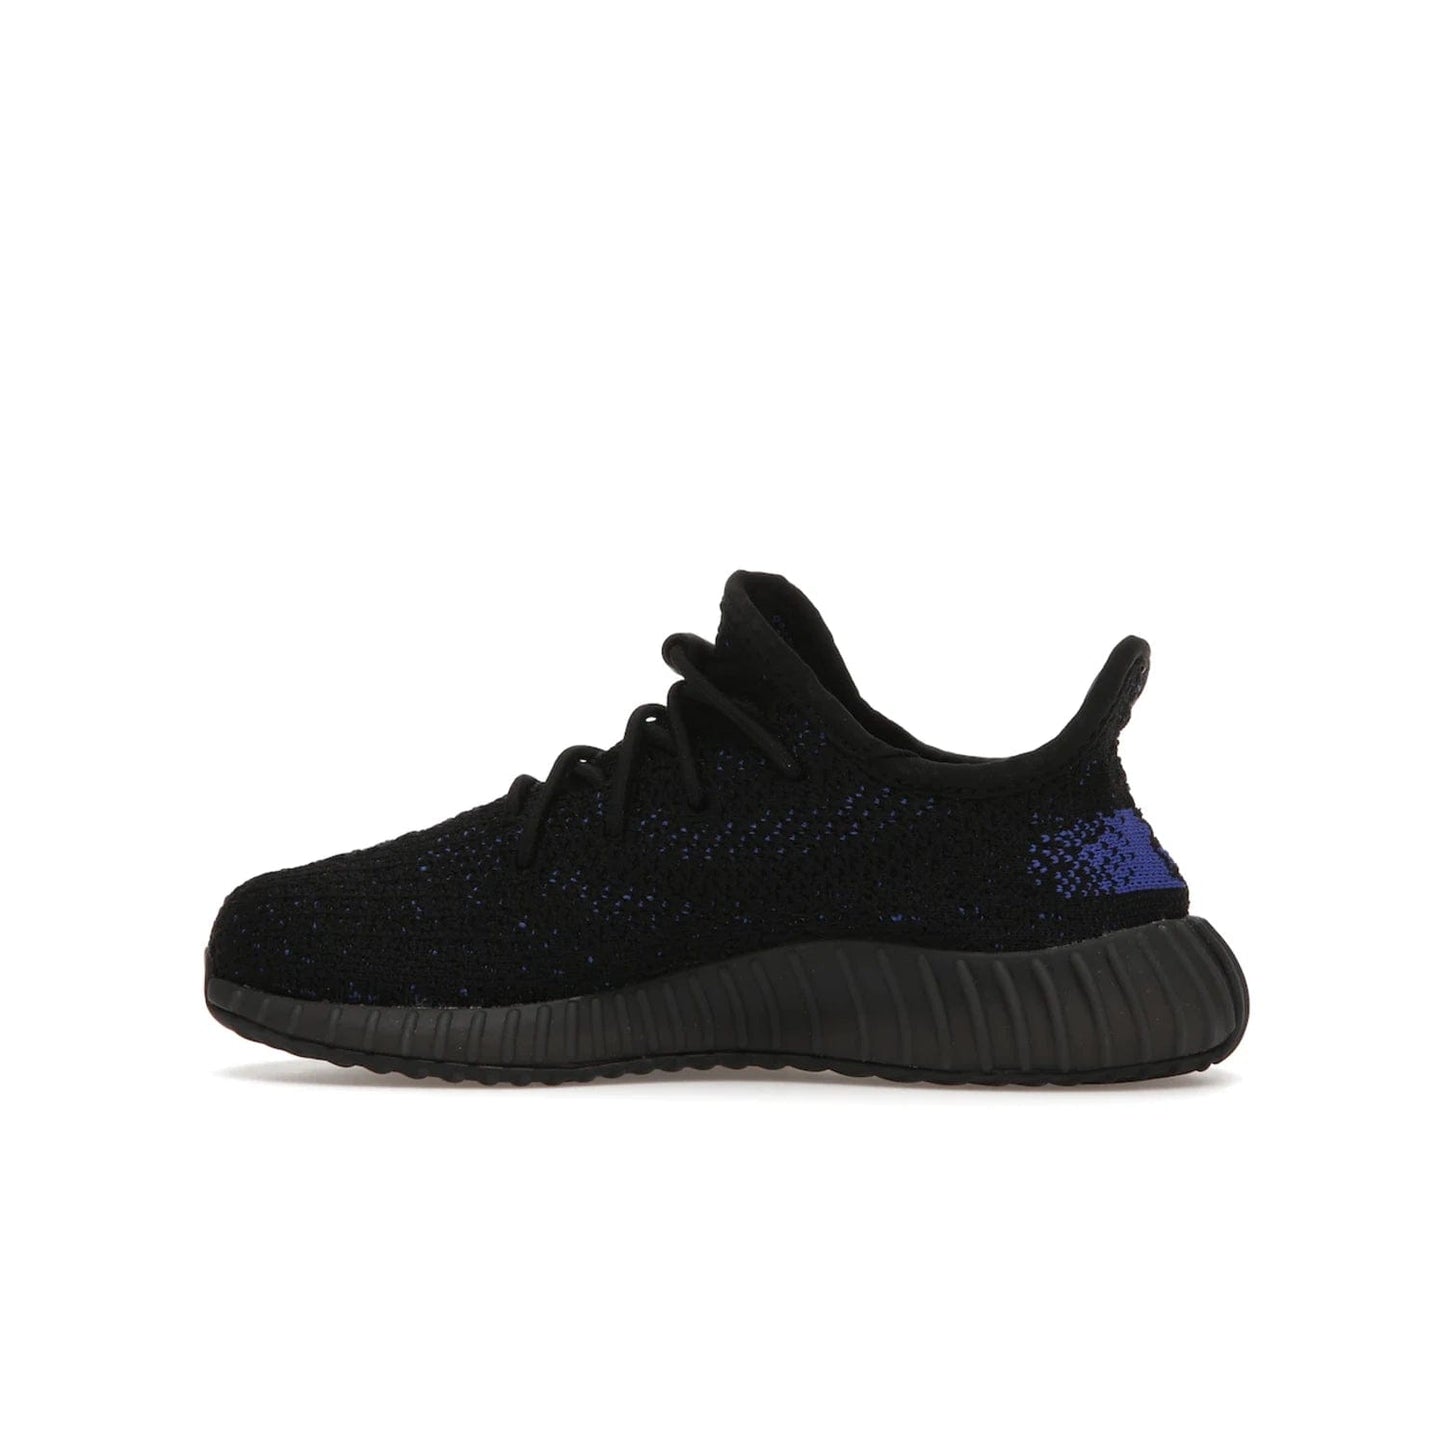 adidas Yeezy Boost 350 V2 Dazzling Blue (Kids) - Image 20 - Only at www.BallersClubKickz.com - Shop the adidas Yeezy Boost 350 V2 Dazzling Blue (Kids). Features a black Primeknit upper with a royal blue 'SPLY-350' streak and a full-length Boost midsole. Durable rubber outsole provides plenty of traction. Available for $160.